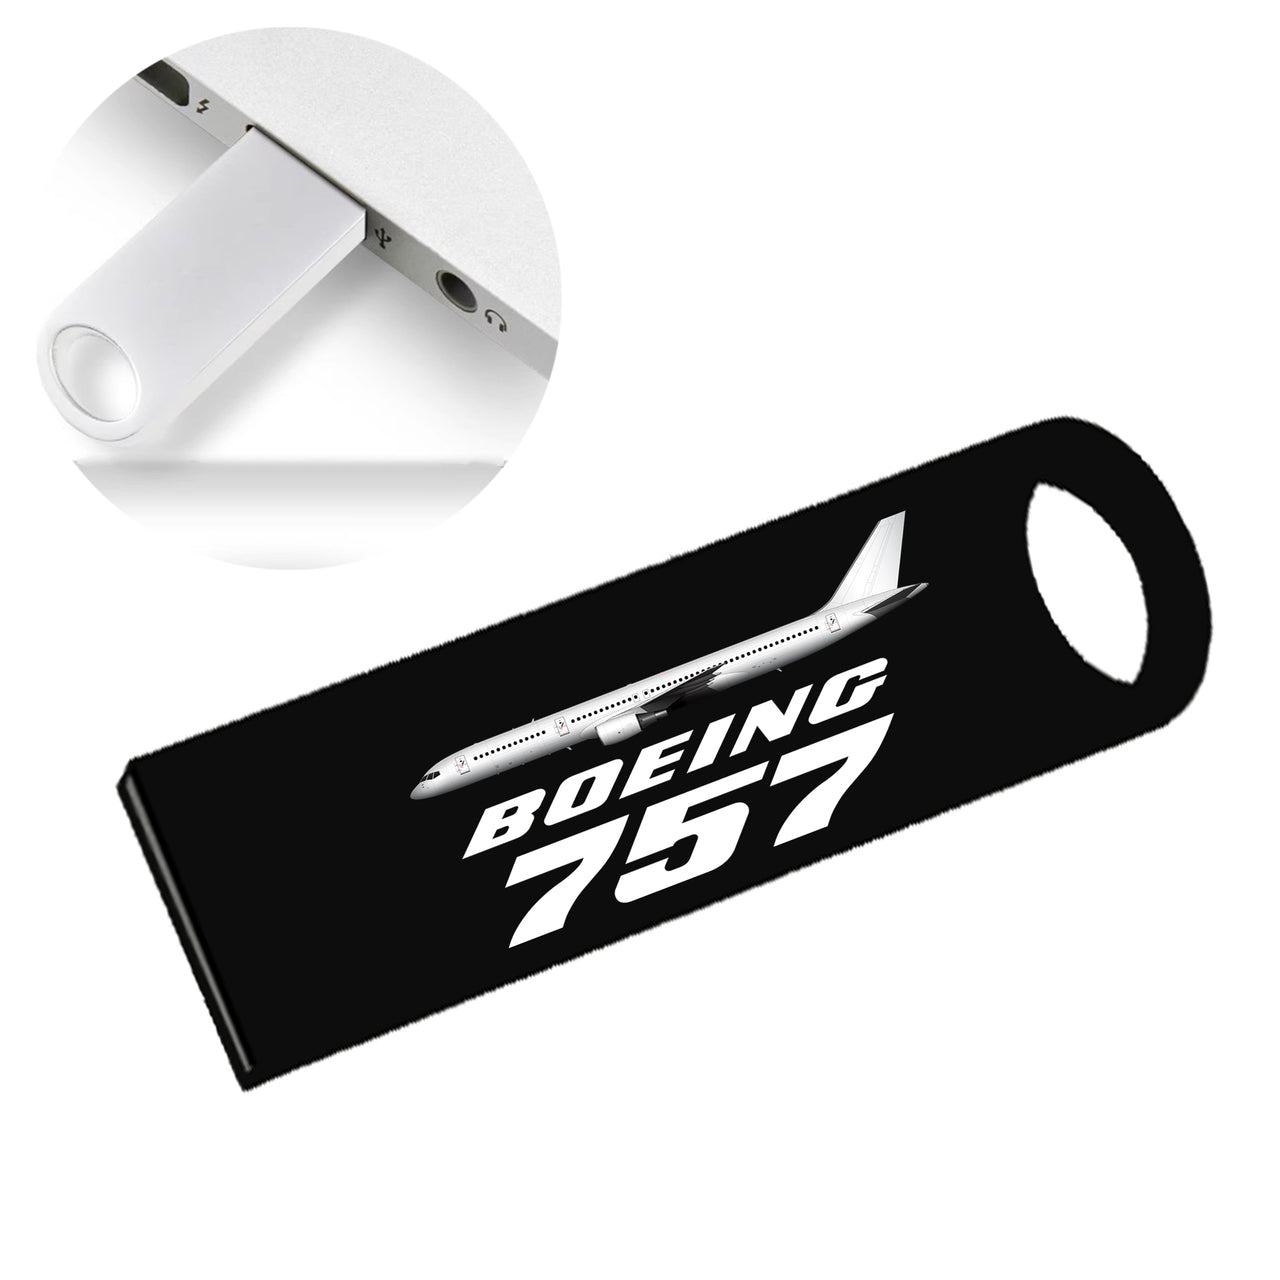 The Boeing 757 Designed Waterproof USB Devices